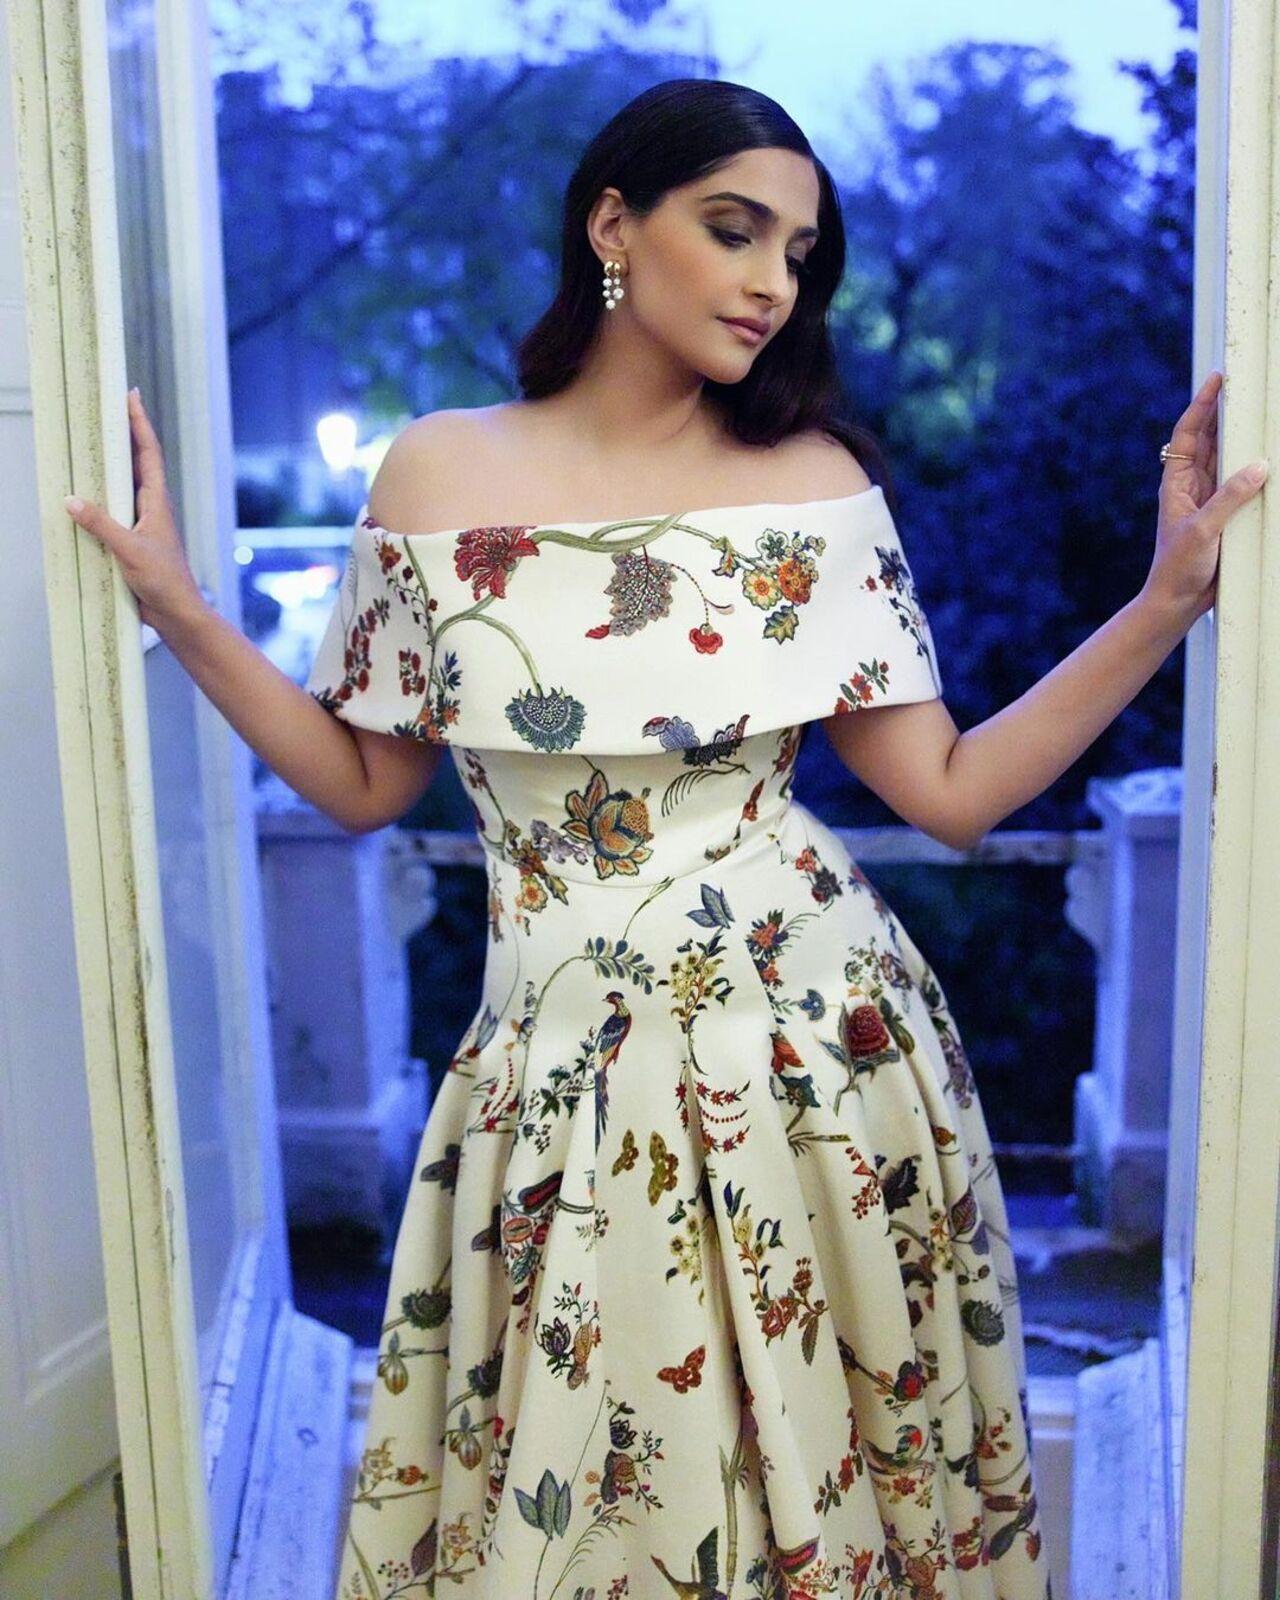 Sonam wore a floral gown designed by her friend, Anamika Khanna. Her makeup was sublime and subtle